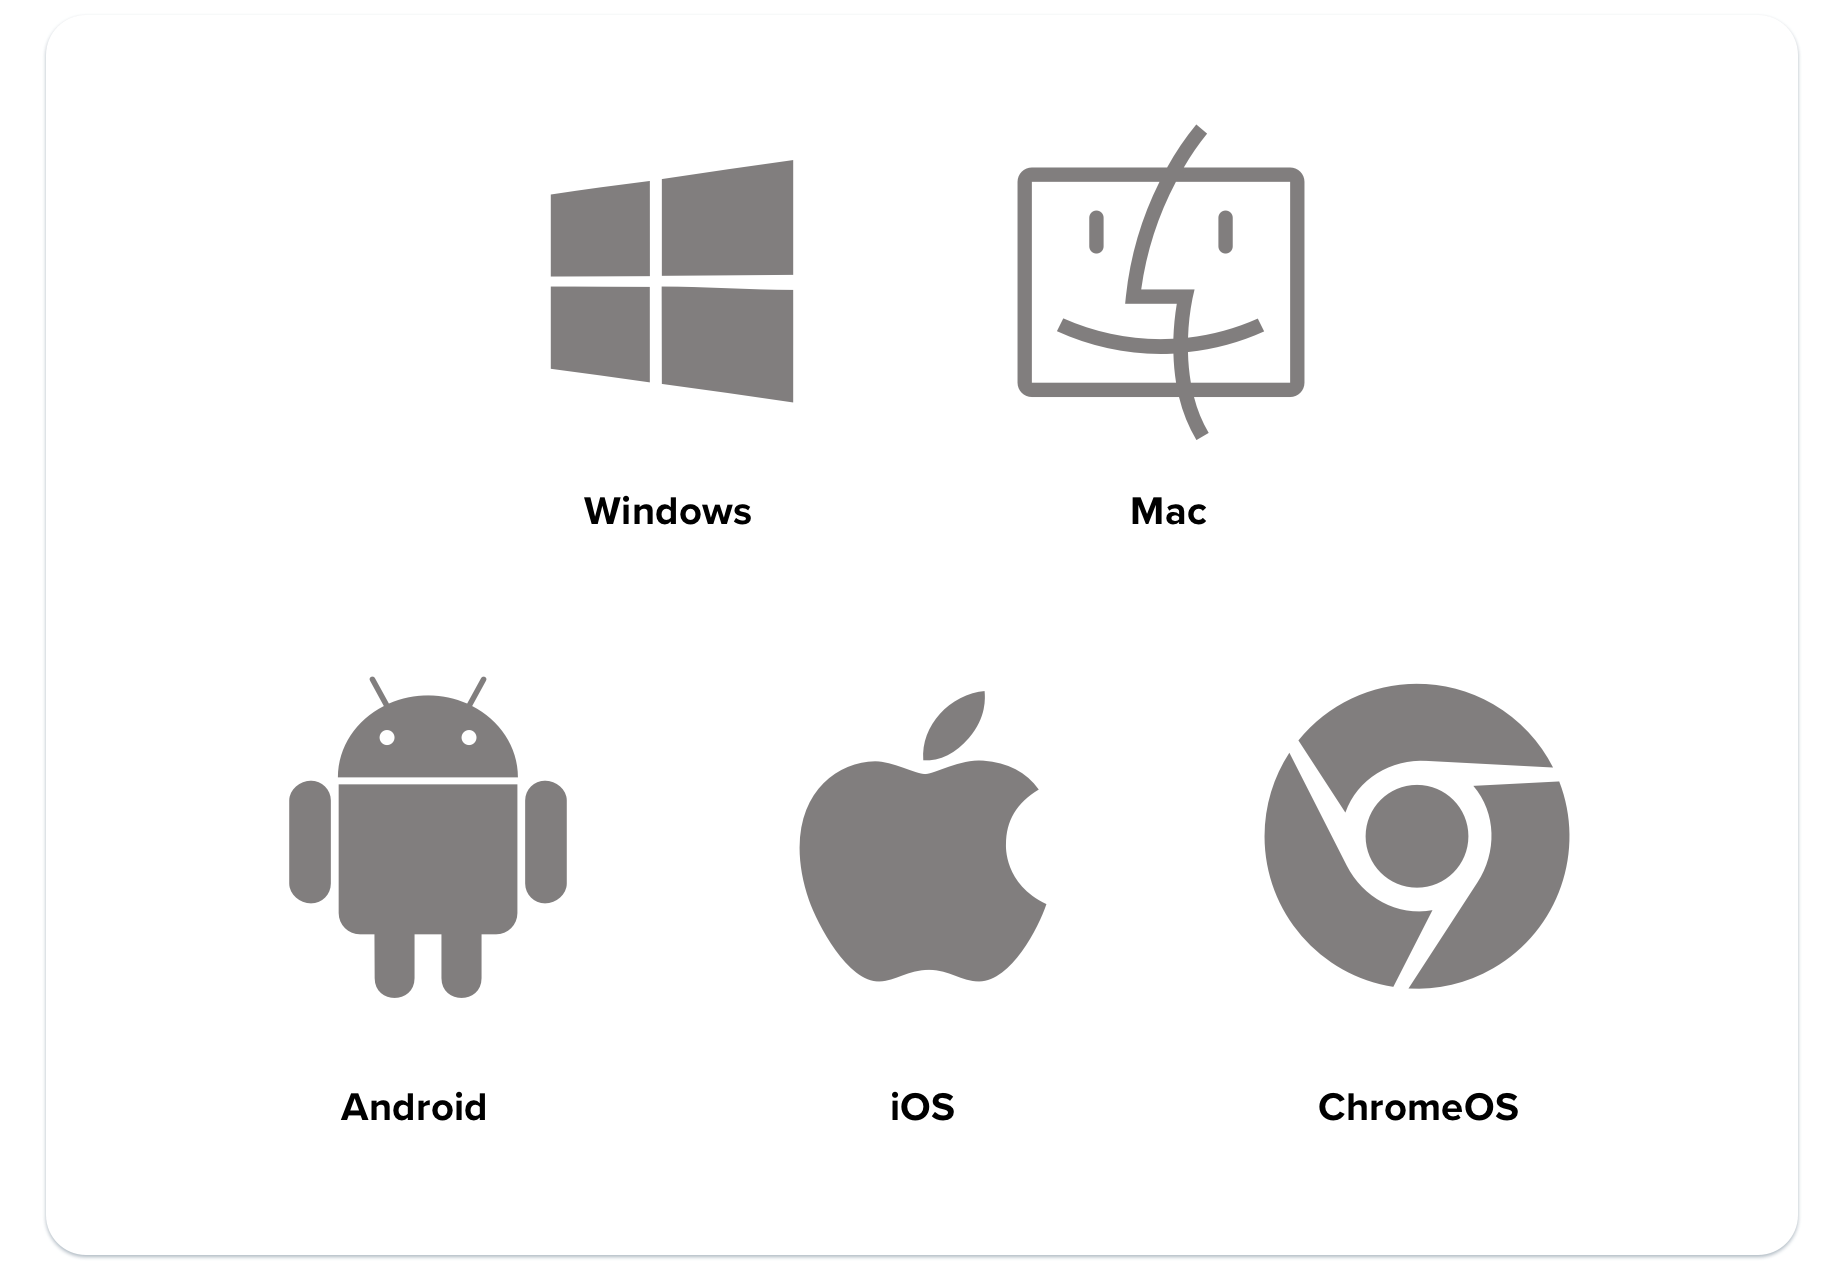 windows or mac for android users